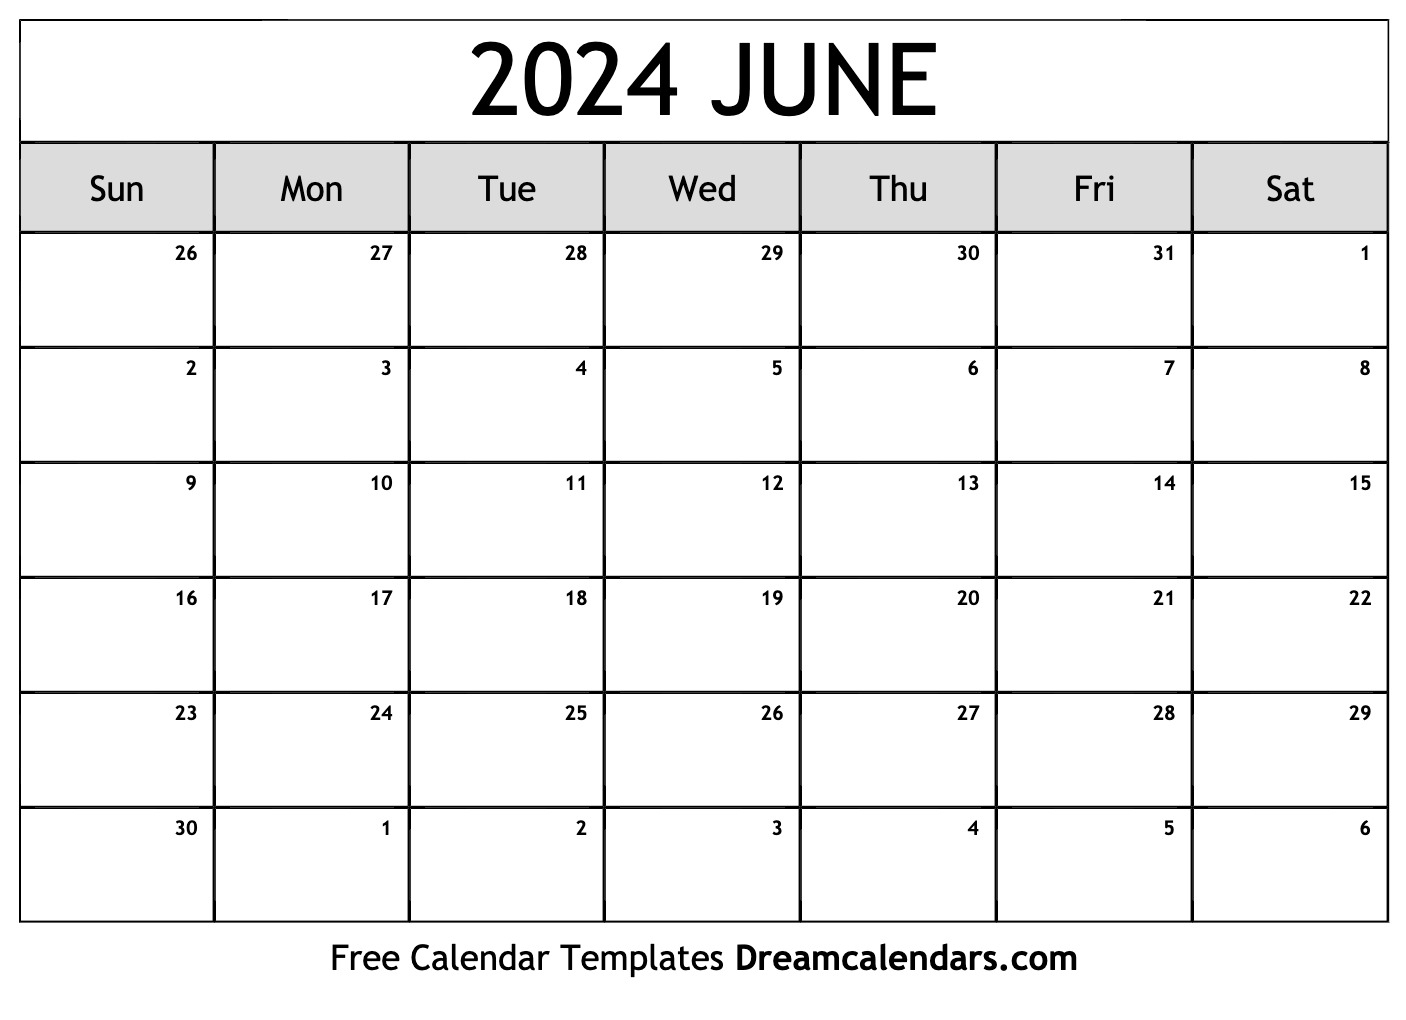 June 2024 Calendar | Free Blank Printable With Holidays for June 2024 Monthly Calendar Printable